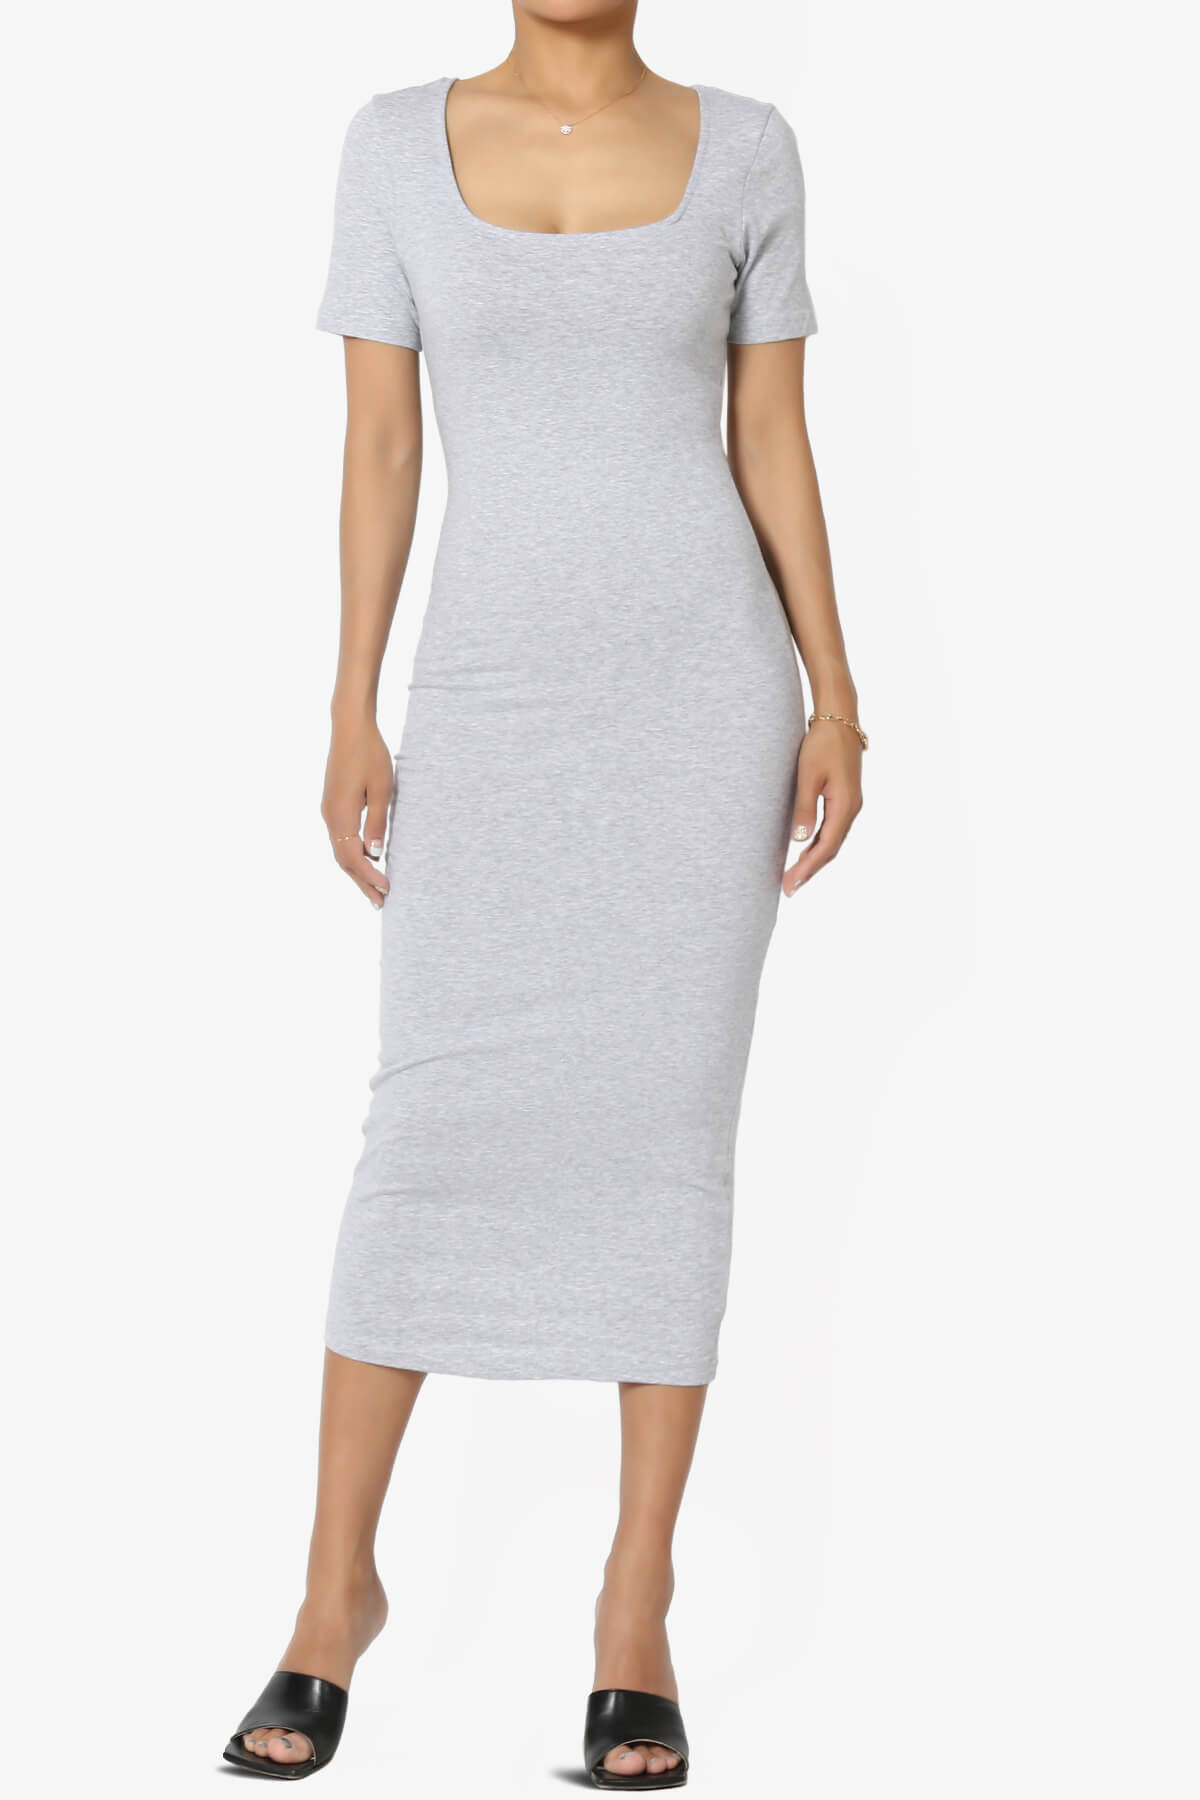 Load image into Gallery viewer, Fontella Short Sleeve Square Neck Bodycon Dress HEATHER GREY_1
